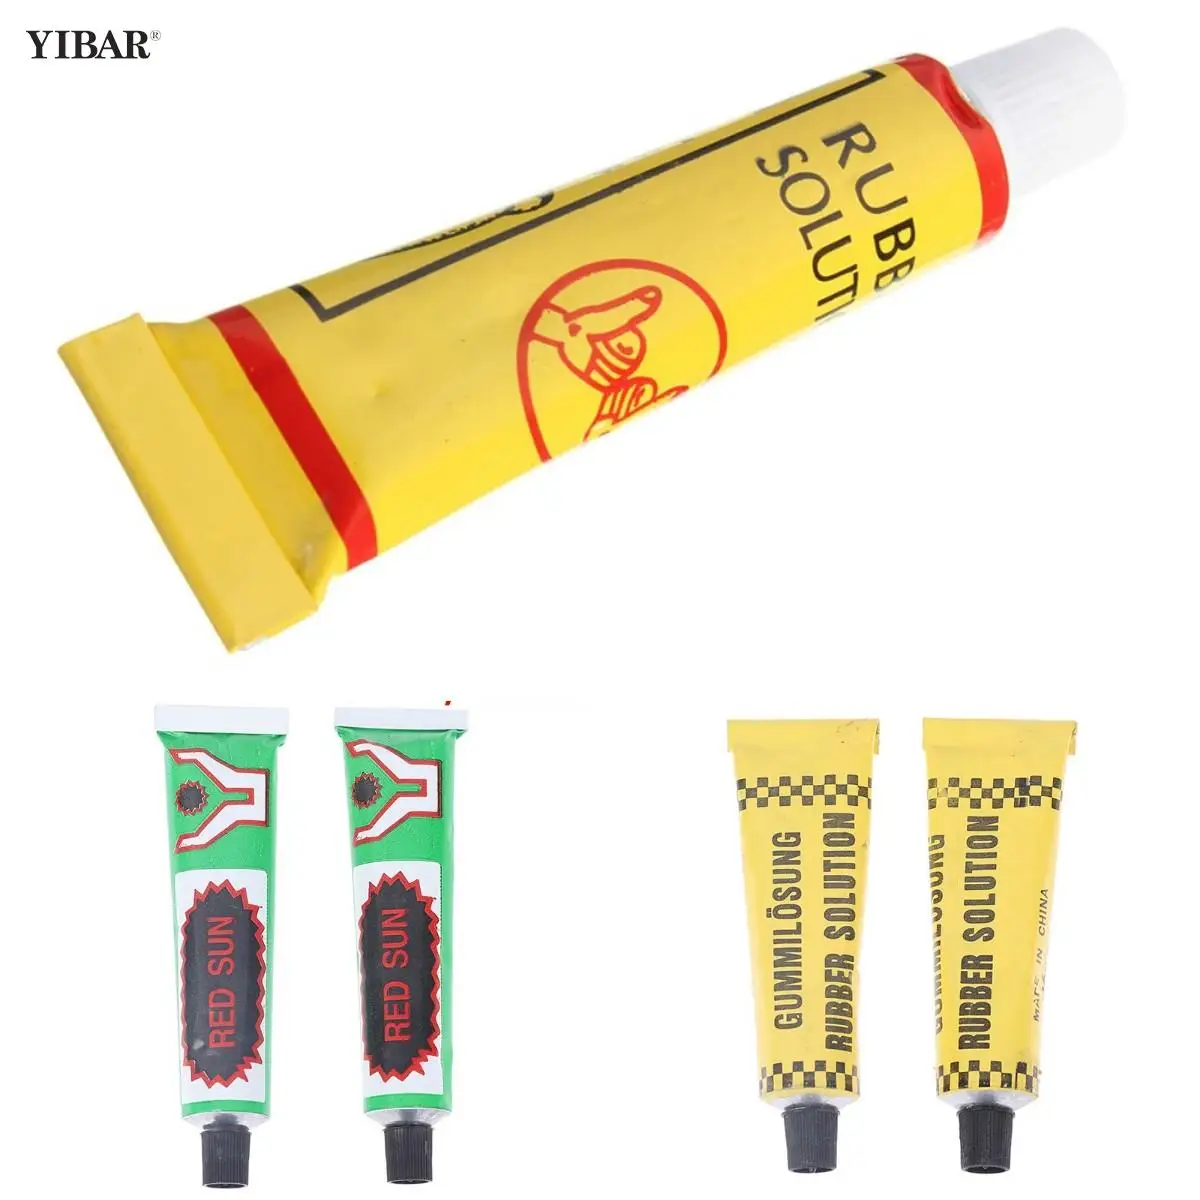 

10ml/12g Automobile Motorcycle Bicycle Tire Tyre Repairing Glue Inner Tube Puncture Repair Cement Rubber Cold Patch Solution